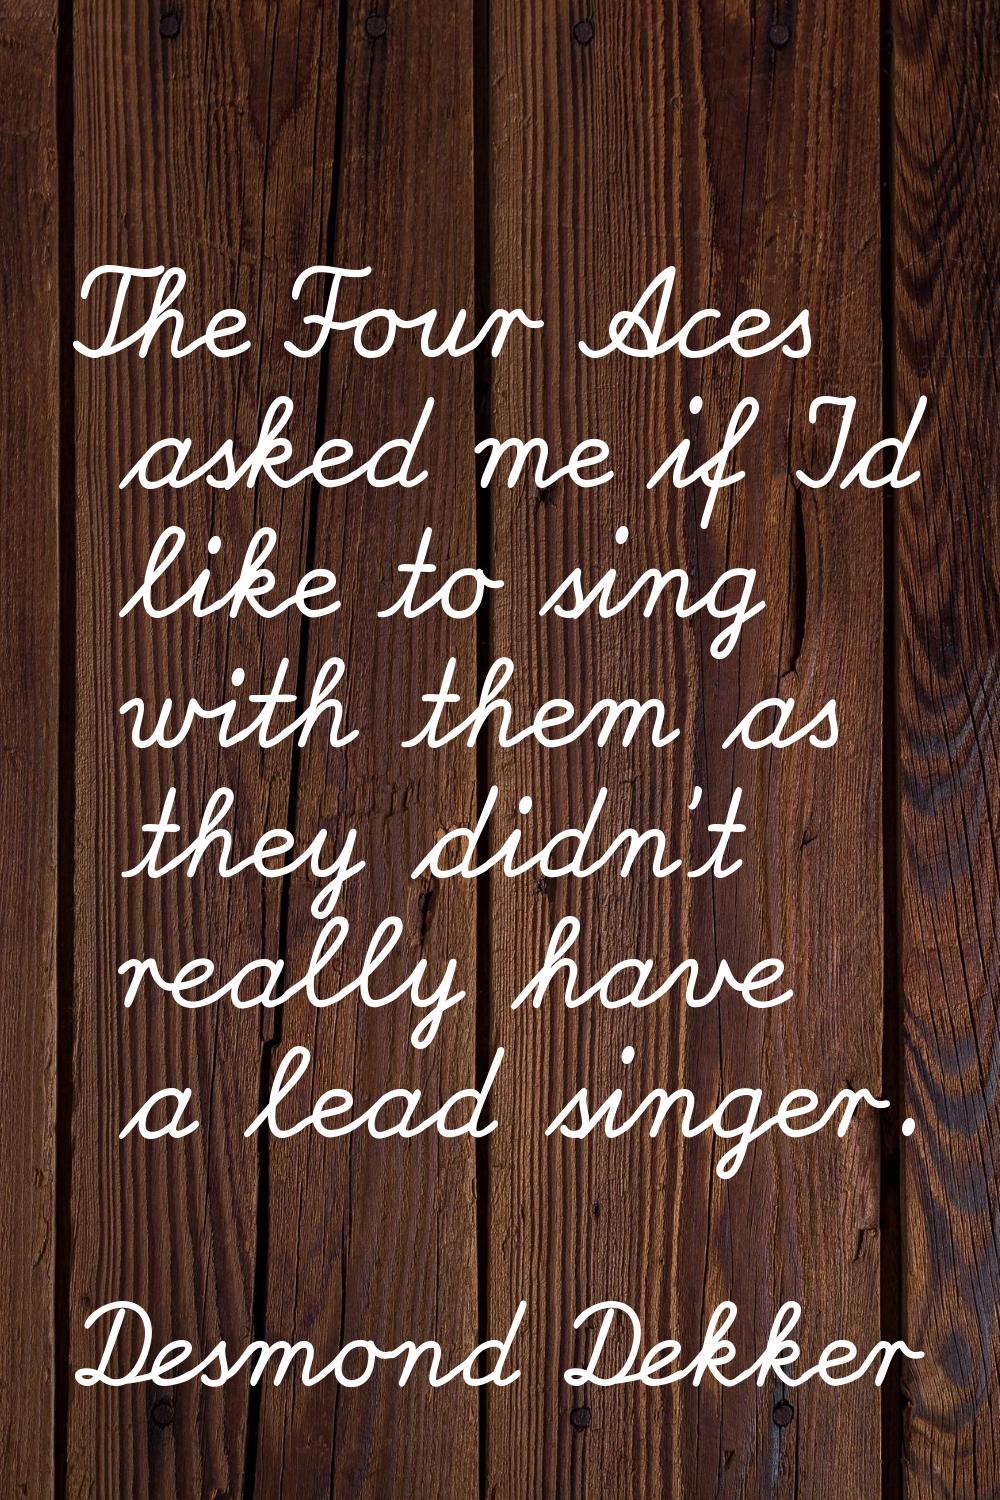 The Four Aces asked me if I'd like to sing with them as they didn't really have a lead singer.